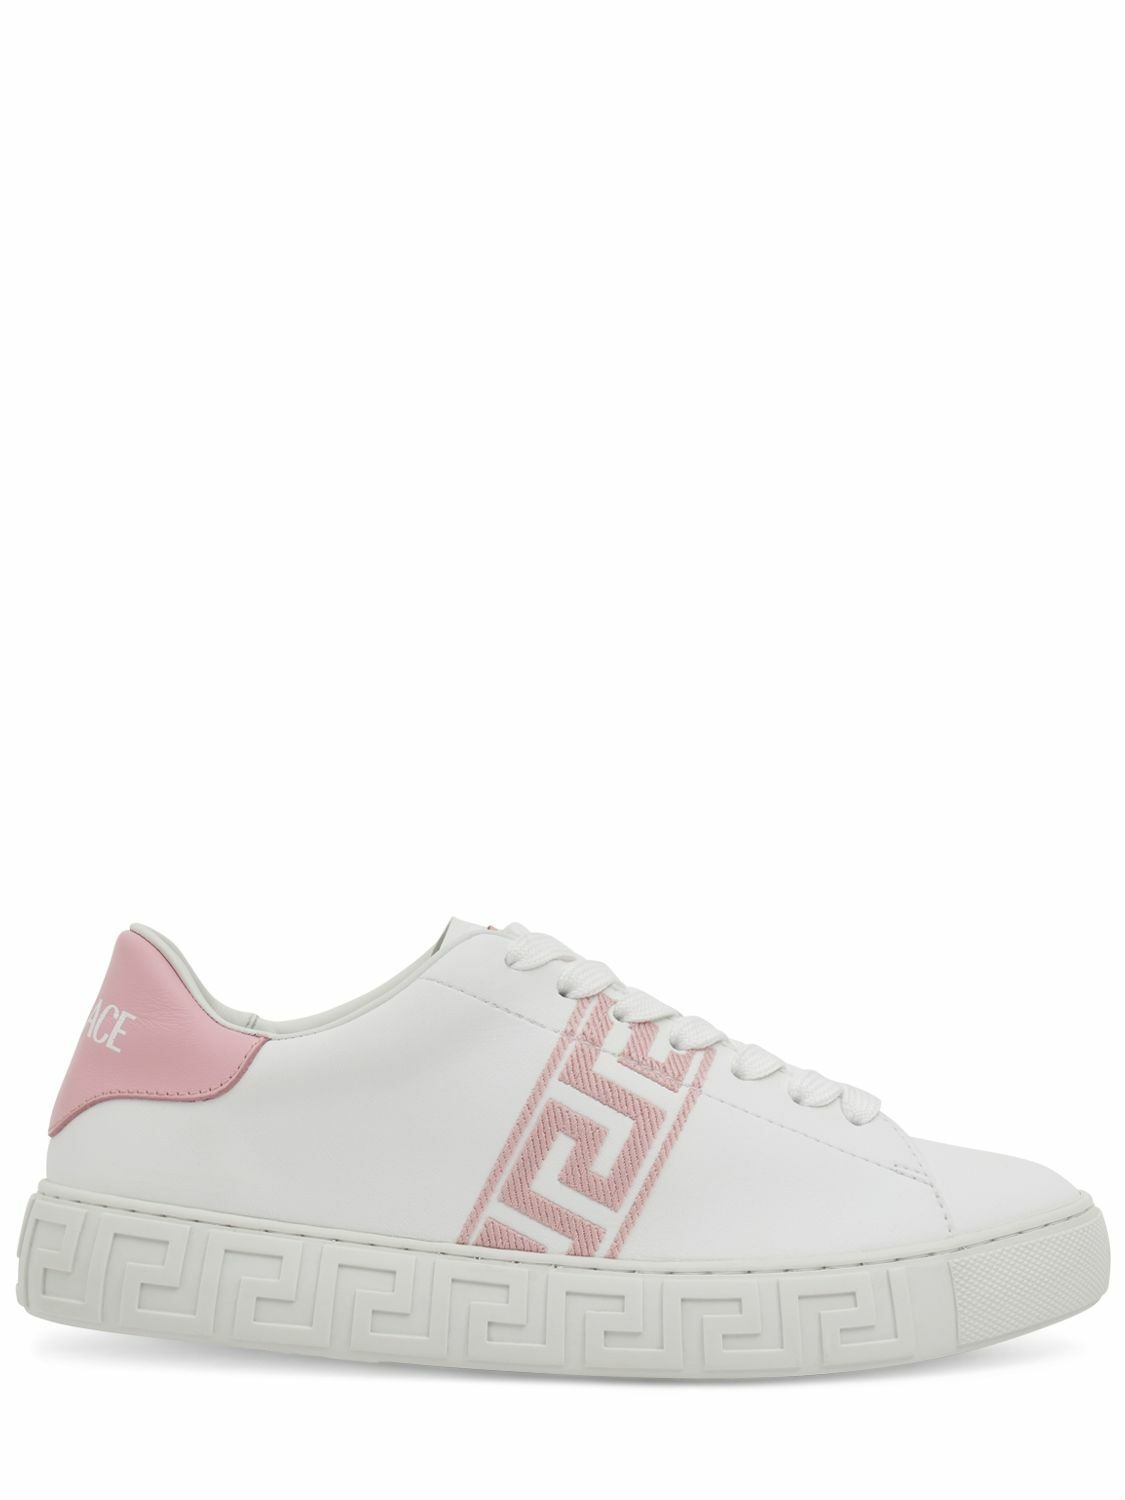 Photo: VERSACE - Embroidered Faux Leather Sneakers